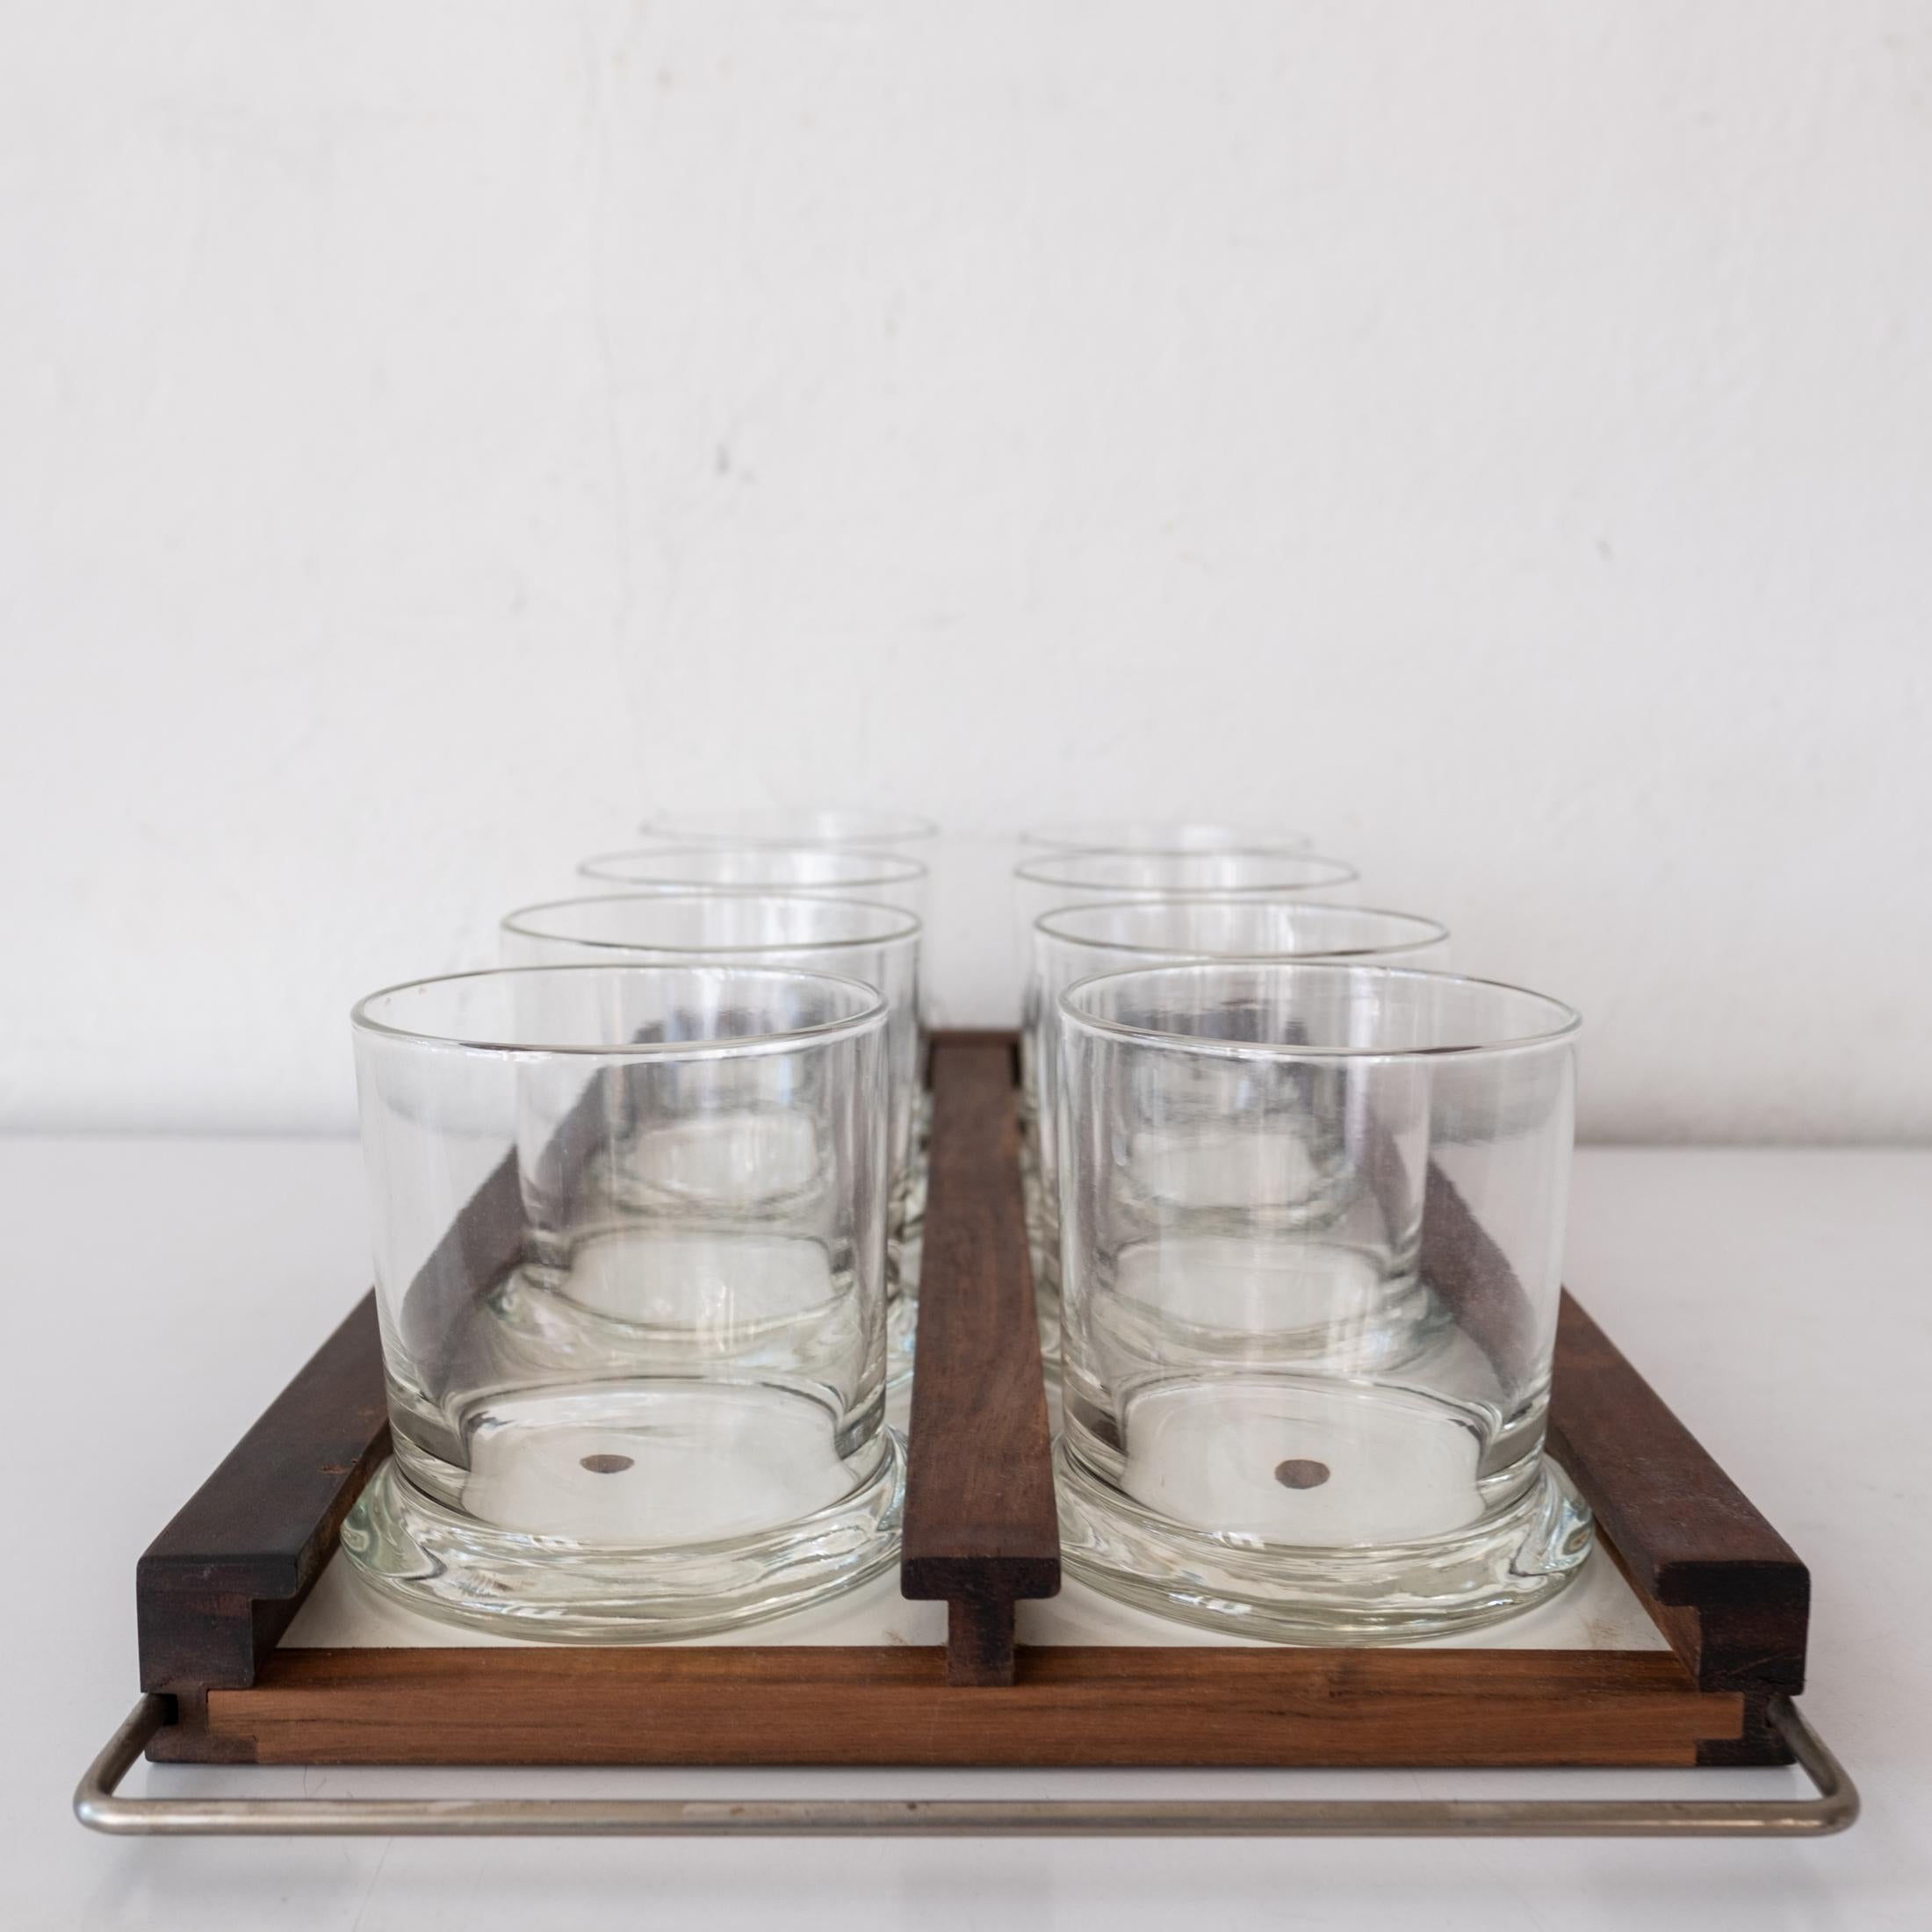 Mid-20th Century Walnut and Brass Wall Mounted Tray and Glasses For Sale